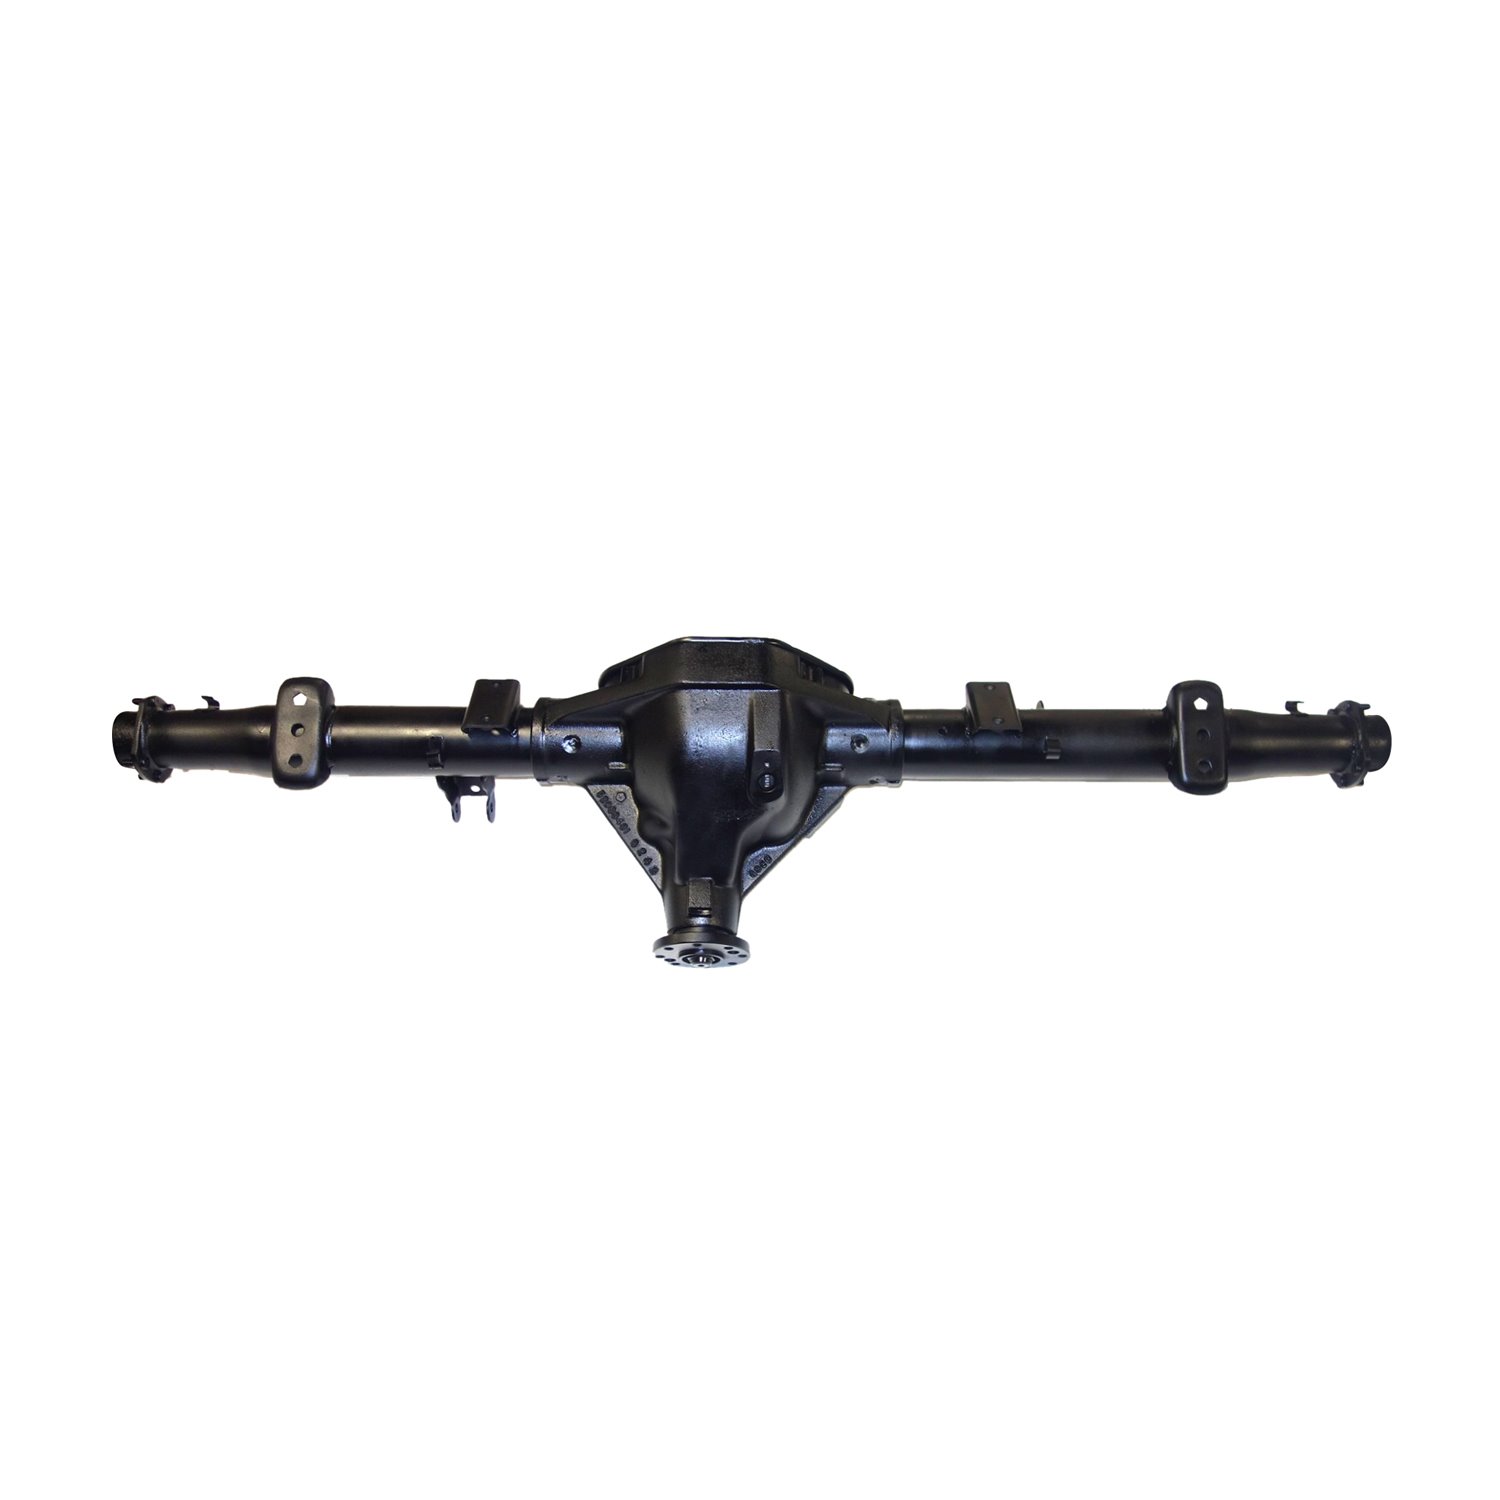 Remanufactured Axle Assy for Chy 9.25" 2006 Dodge Durango 3.55 , 4x4 w/ Traction Control